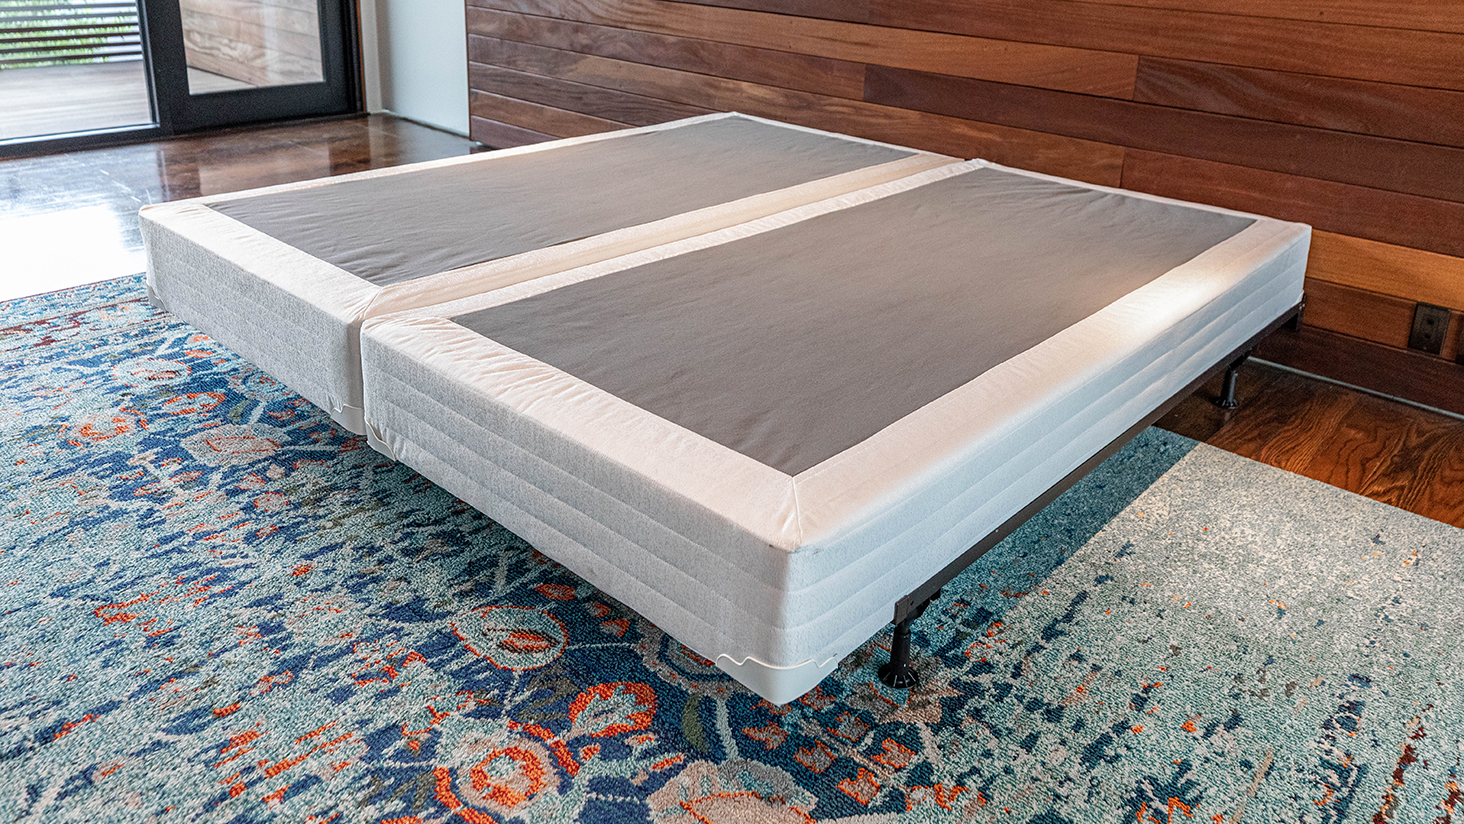 Can A Bad Box Spring Ruin Mattress, How To Get Rid Of Bed Frame And Box Spring